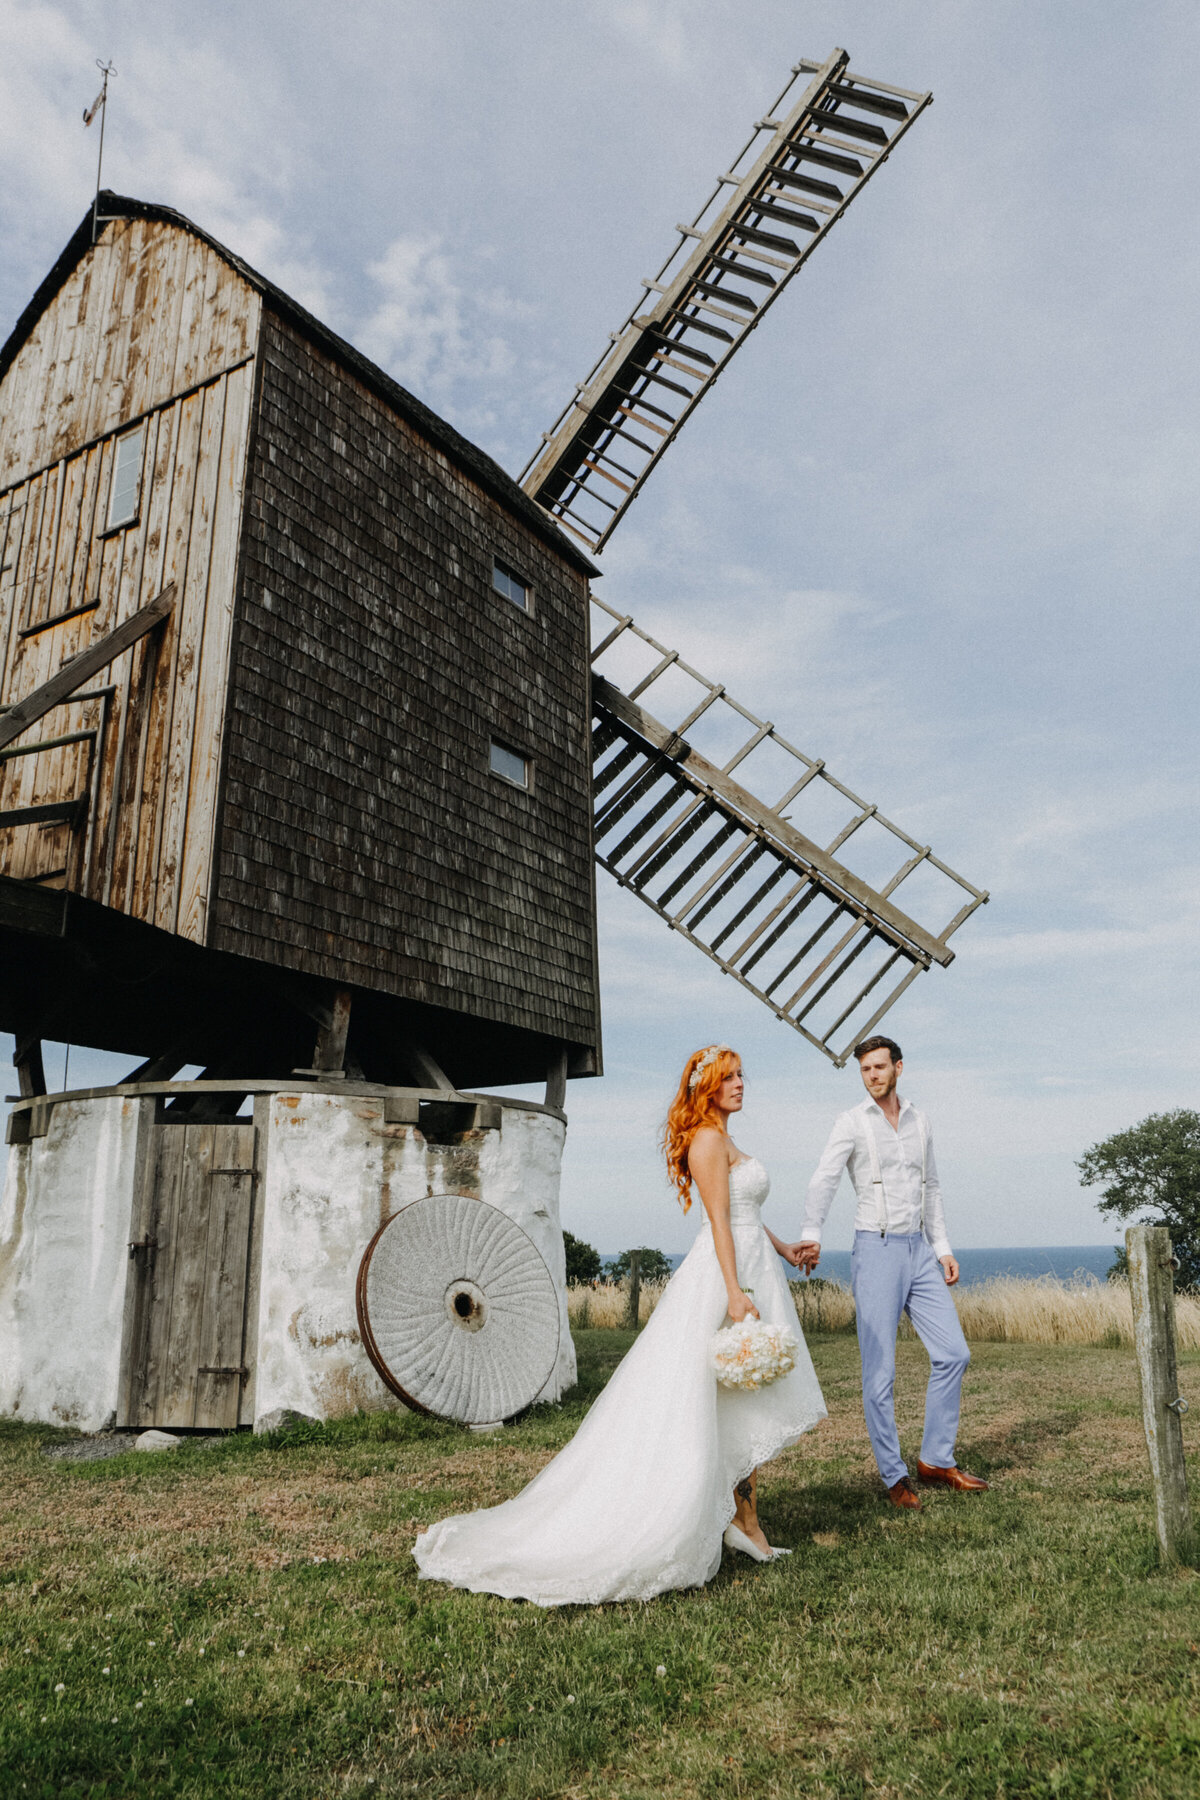 A couple by the old mill during their adventure elopement wedding abroad to Bornholm